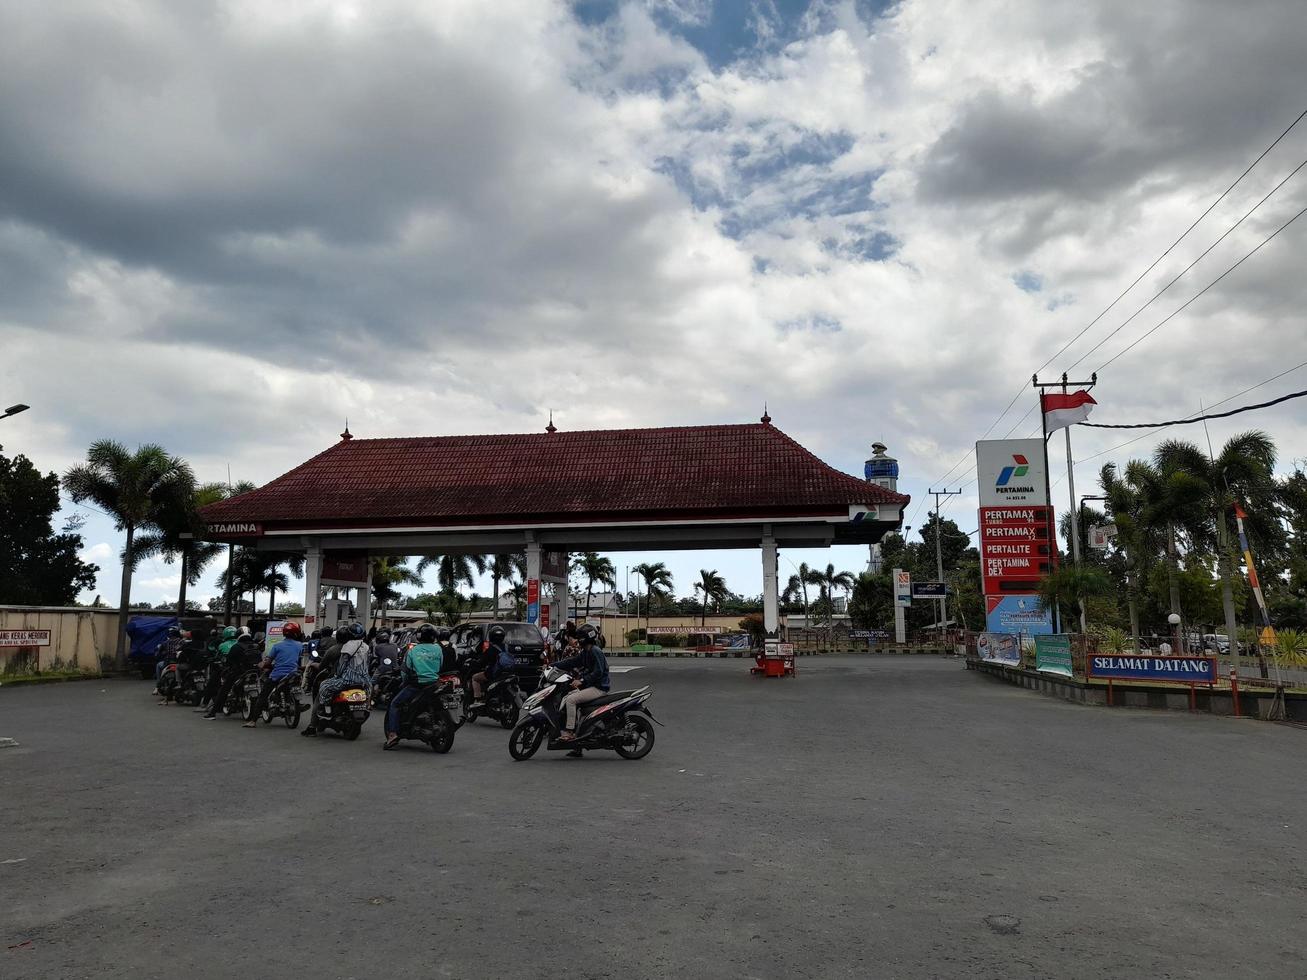 Mataram City, Lombok Island, Indonesia, September 4, 2022, Queue for refueling vehicles at Pertamina's gas station, with cloudy weather photo